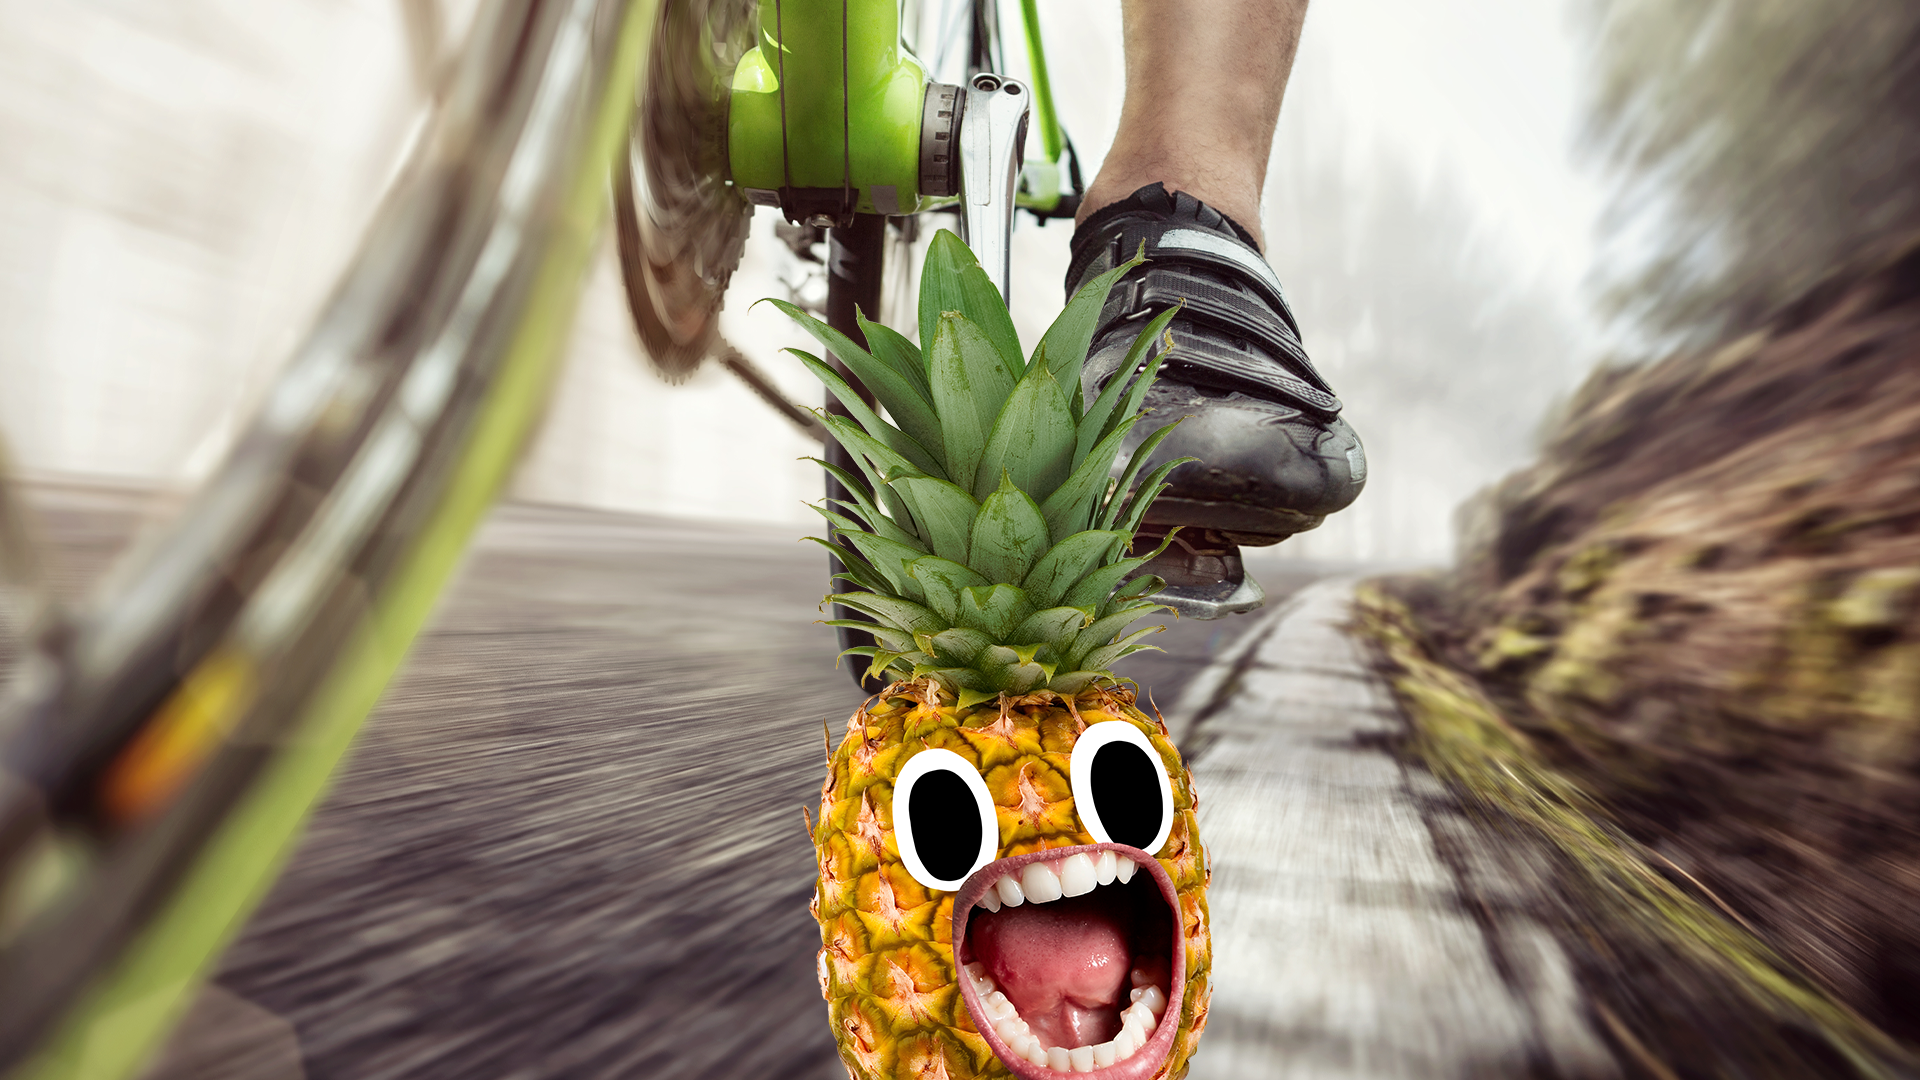 Pinapple looking scared of bicycle wheel